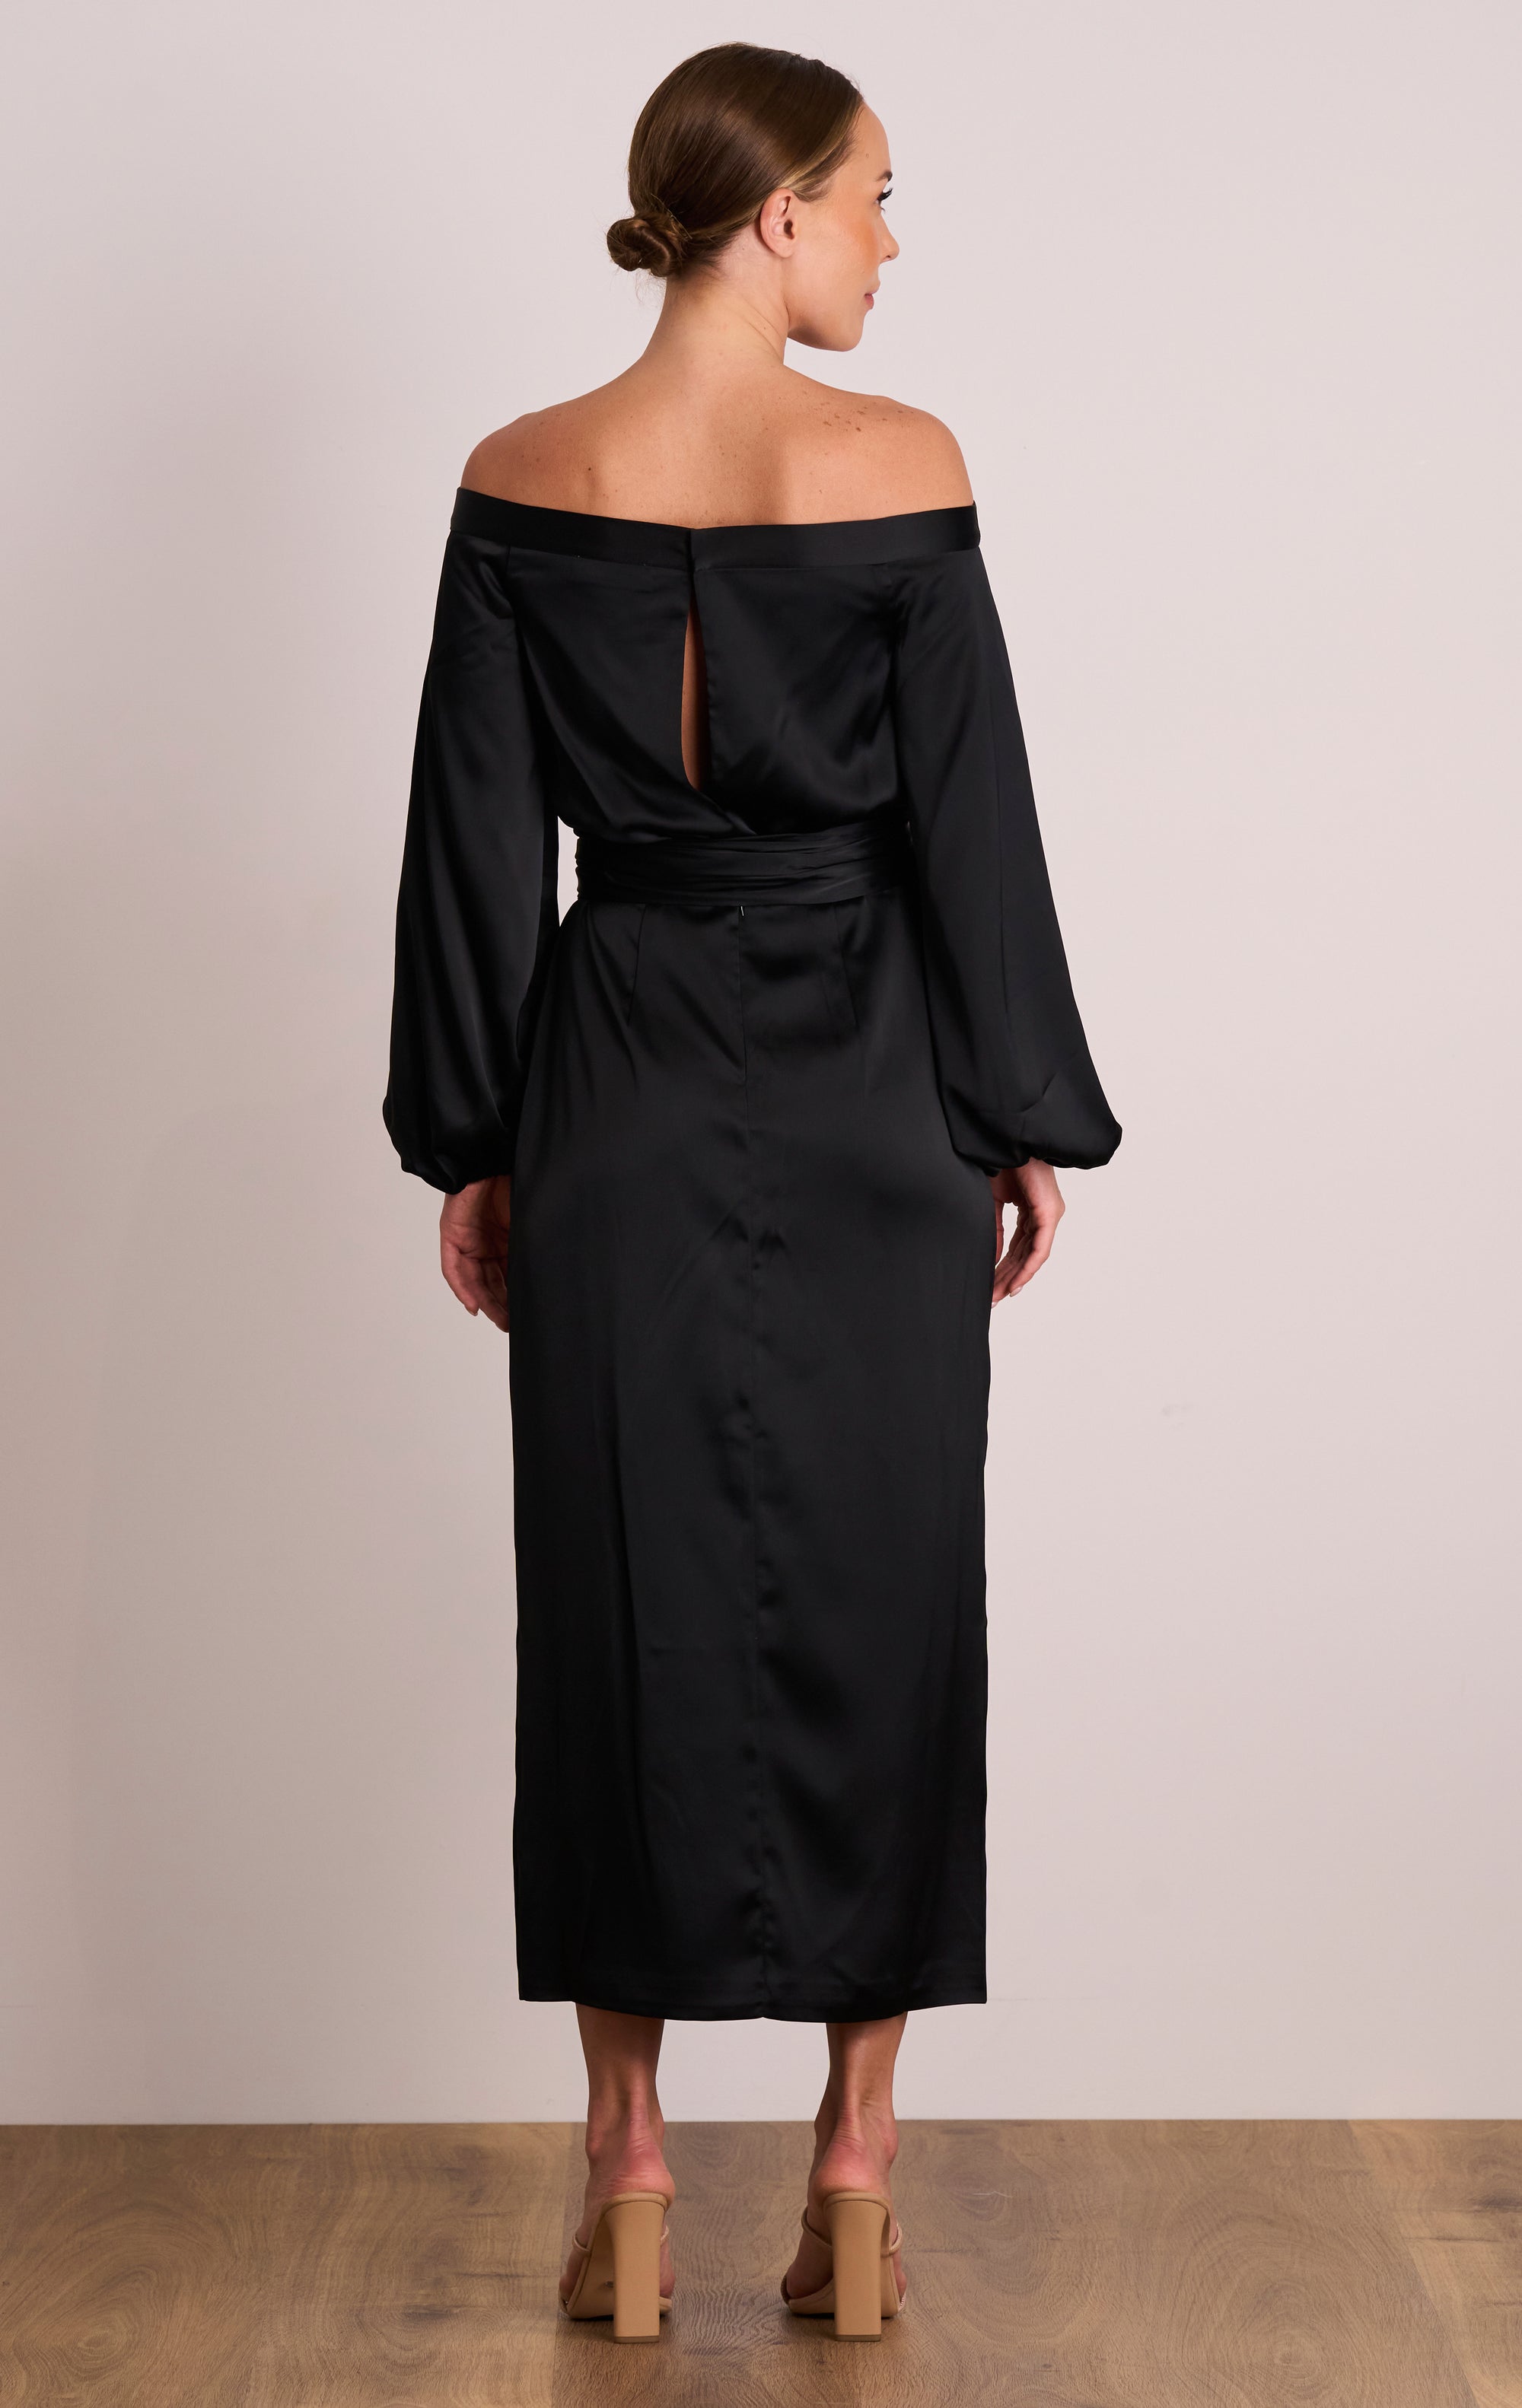 Dreamland Sleeve Midi - TAKE 40% OFF DISCOUNT APPLIED AT CHECKOUT